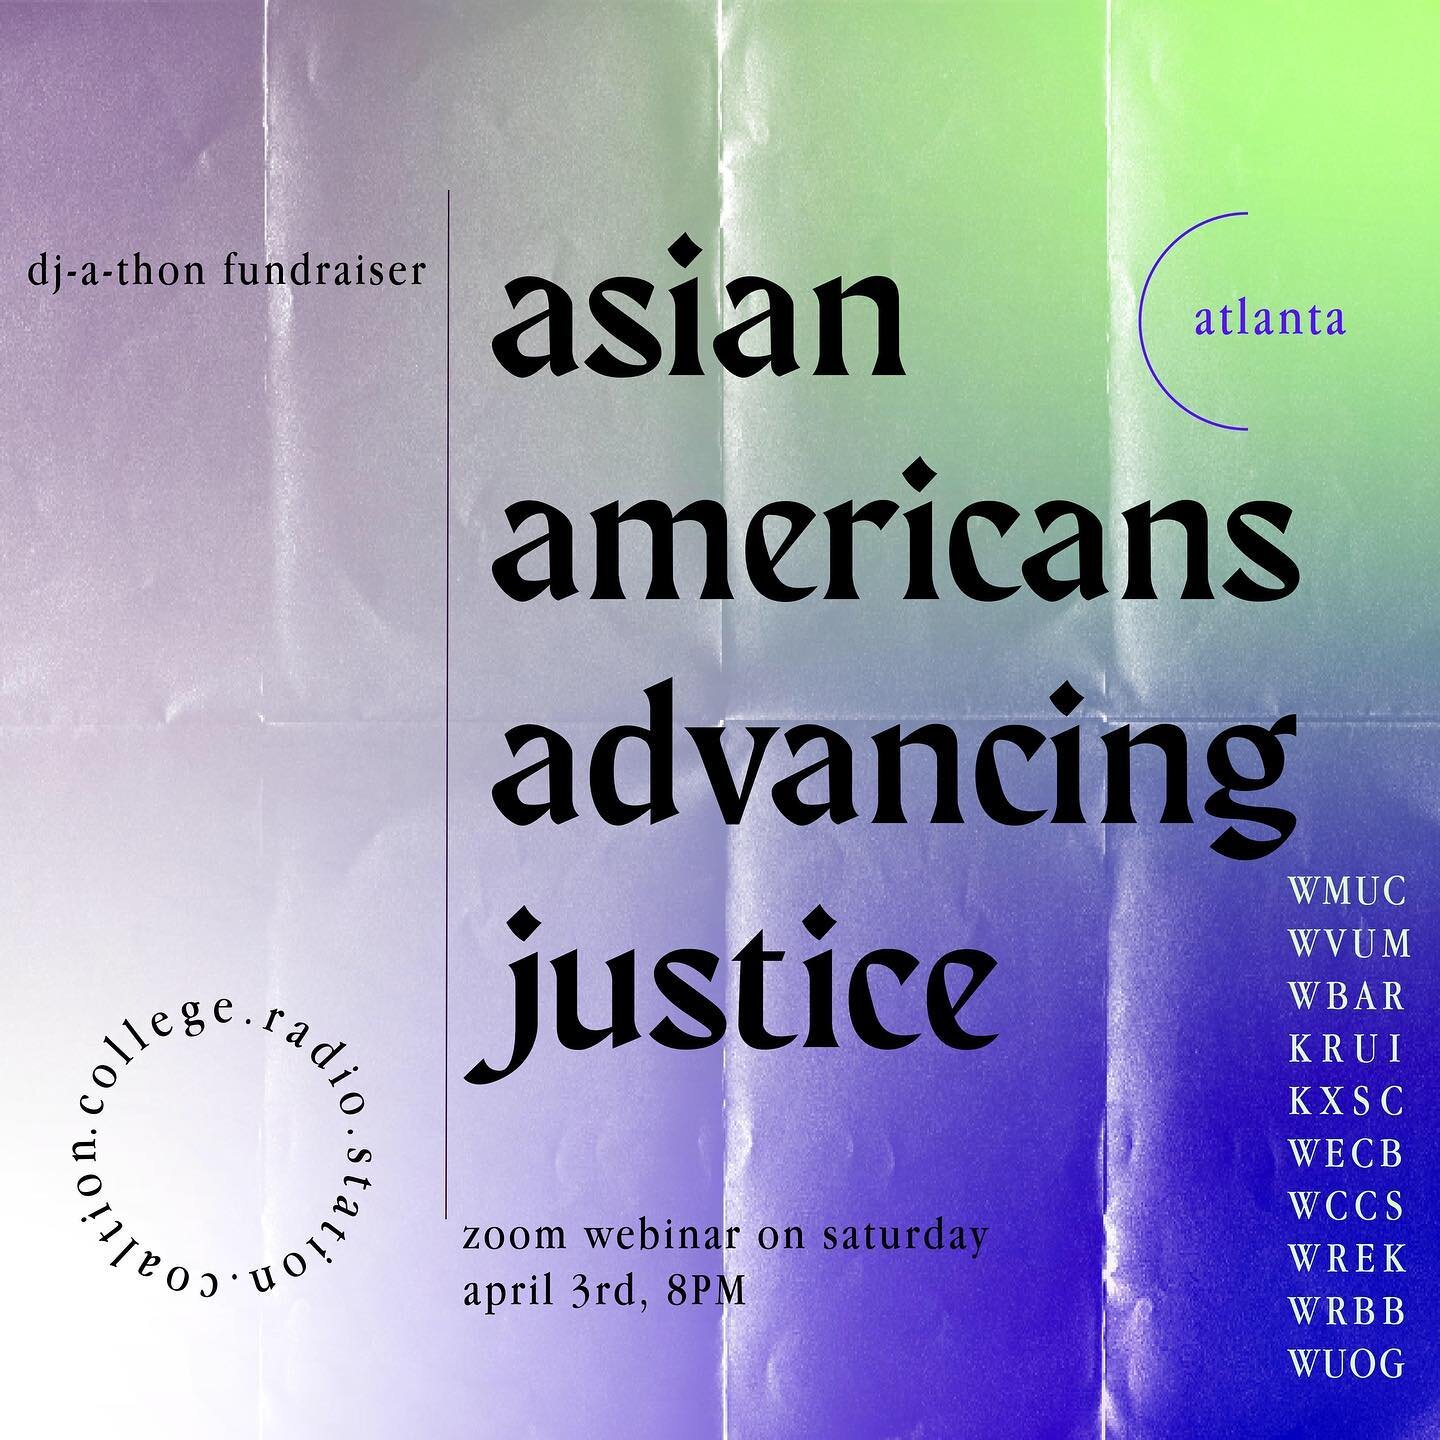 Join our cross-station DJ-a-thon fundraiser for Asian Americans Advancing Justice Atlanta on 4/3 at 8PM EST! Find the link to the Zoom on our Linktree!

DJs will be delivering 15-20 minute segments of their shows, and any funds donated will be sent to AAAJA.

ALT TEXT:

Blue and green, paper-like background; [TEXT READS: dj-a-thon fundraiser; Asian-Americans Advancing Justice Atlanta; Zoom webinar on Saturday April 3 8PM; WMUC, WVUM, WBAR, KRUI, KSXC, WECB, WCCS, WREK, WRBB, WUOG]